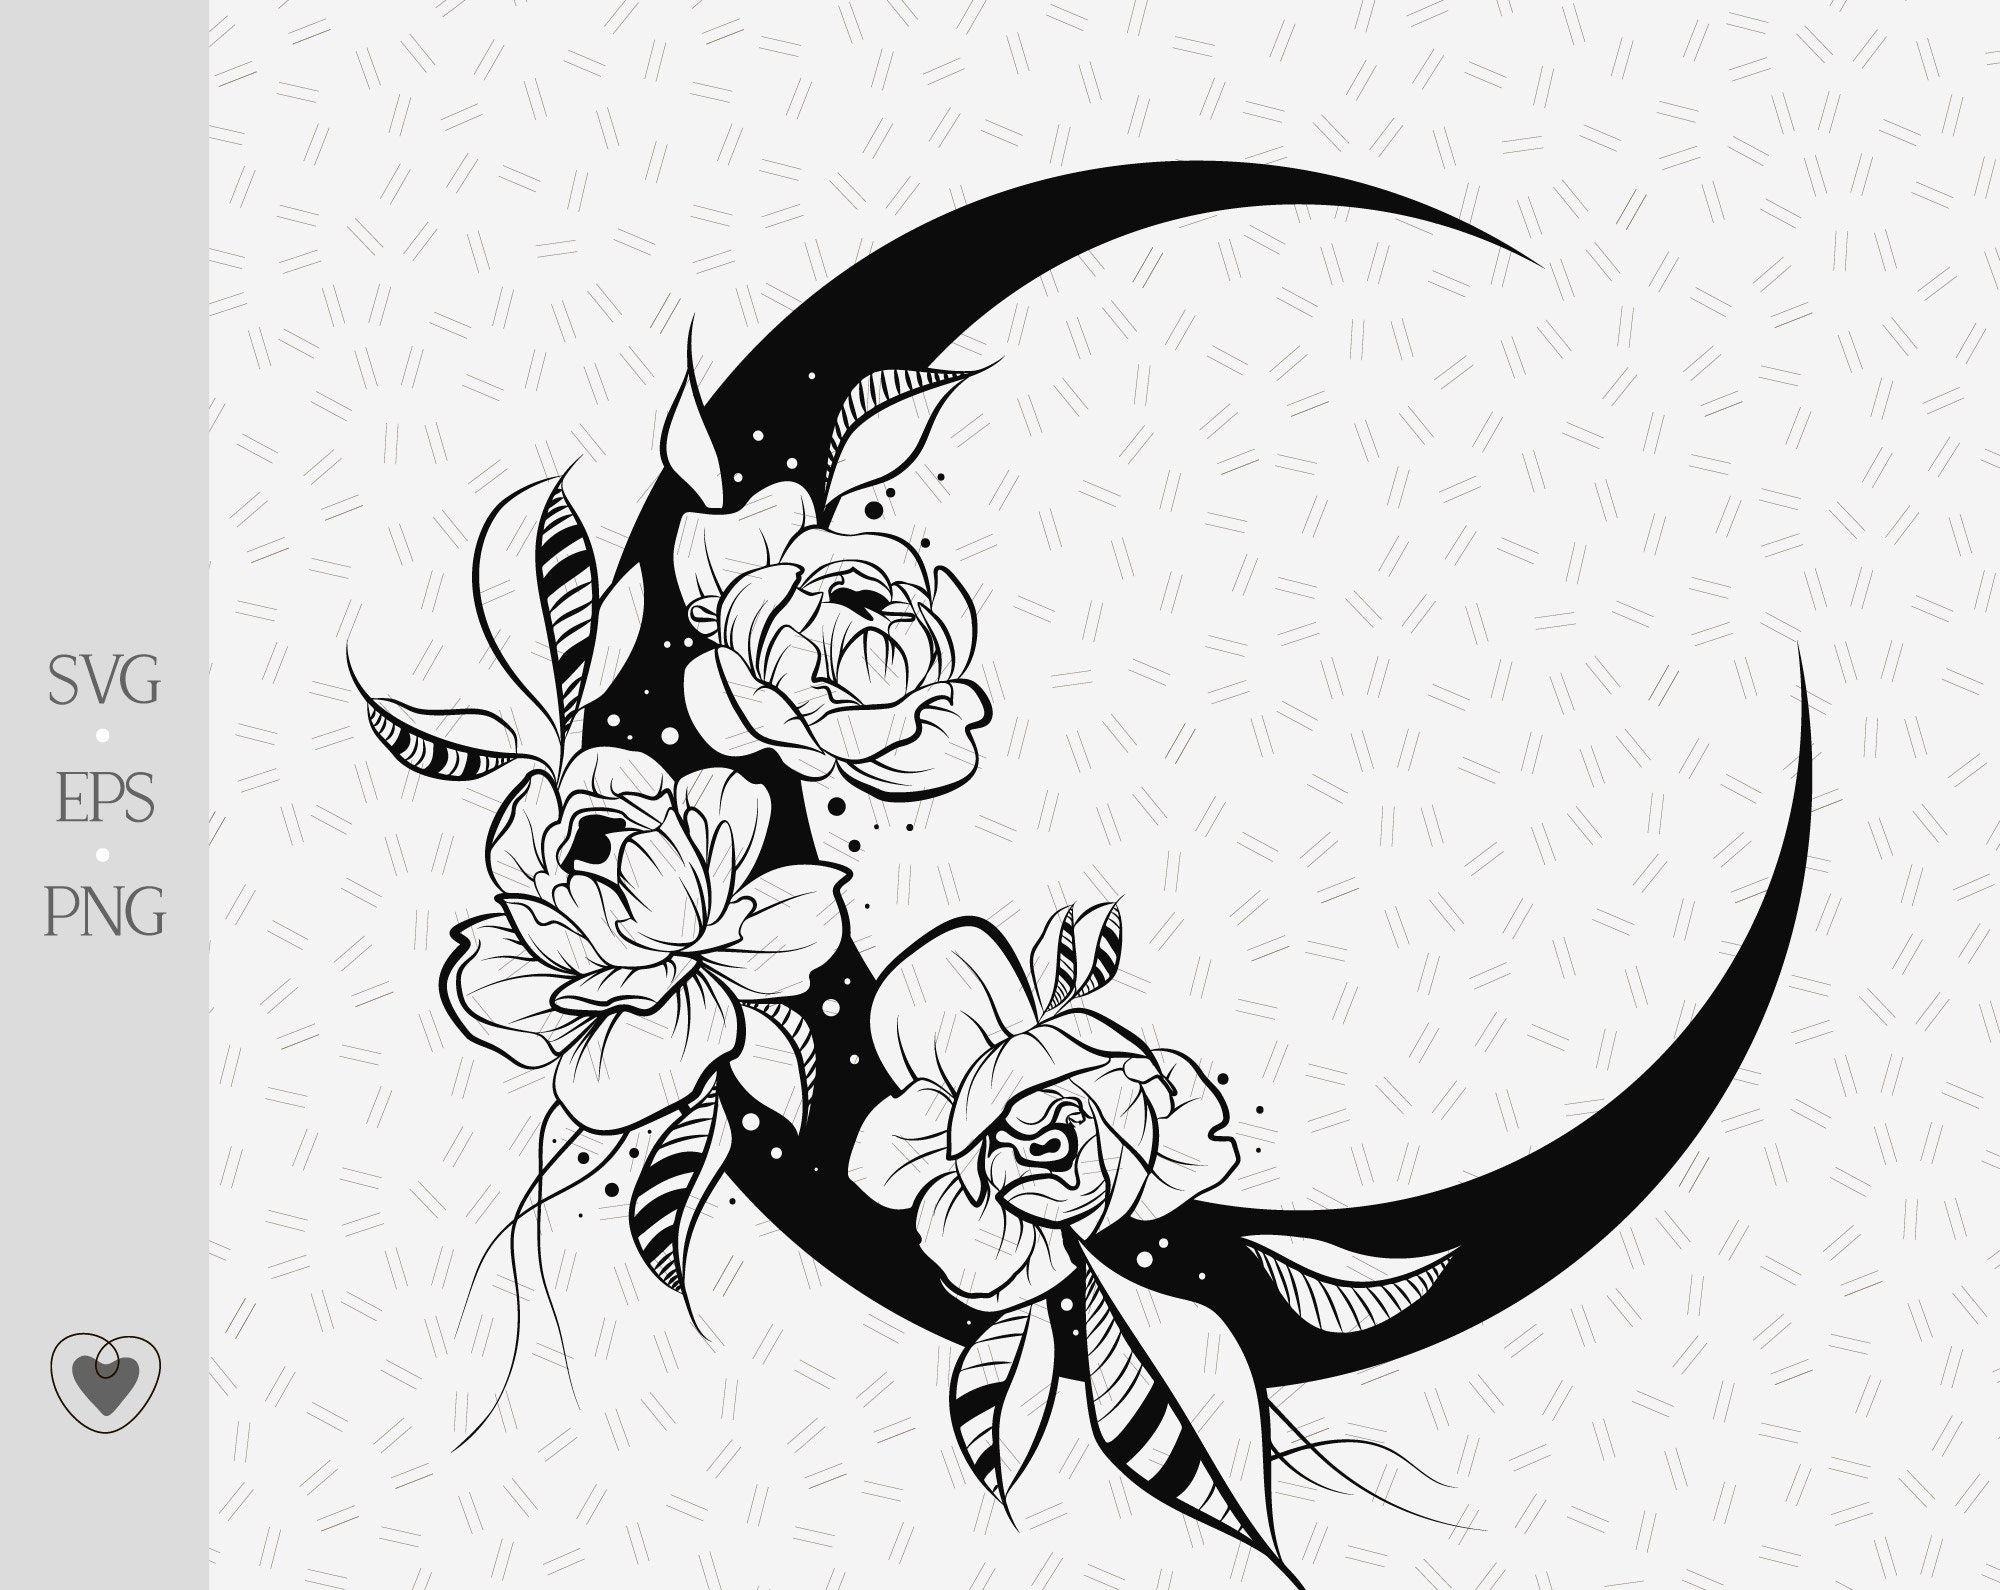 6. Moonflower Lotus Moon Tattoo Black and White - wide 2